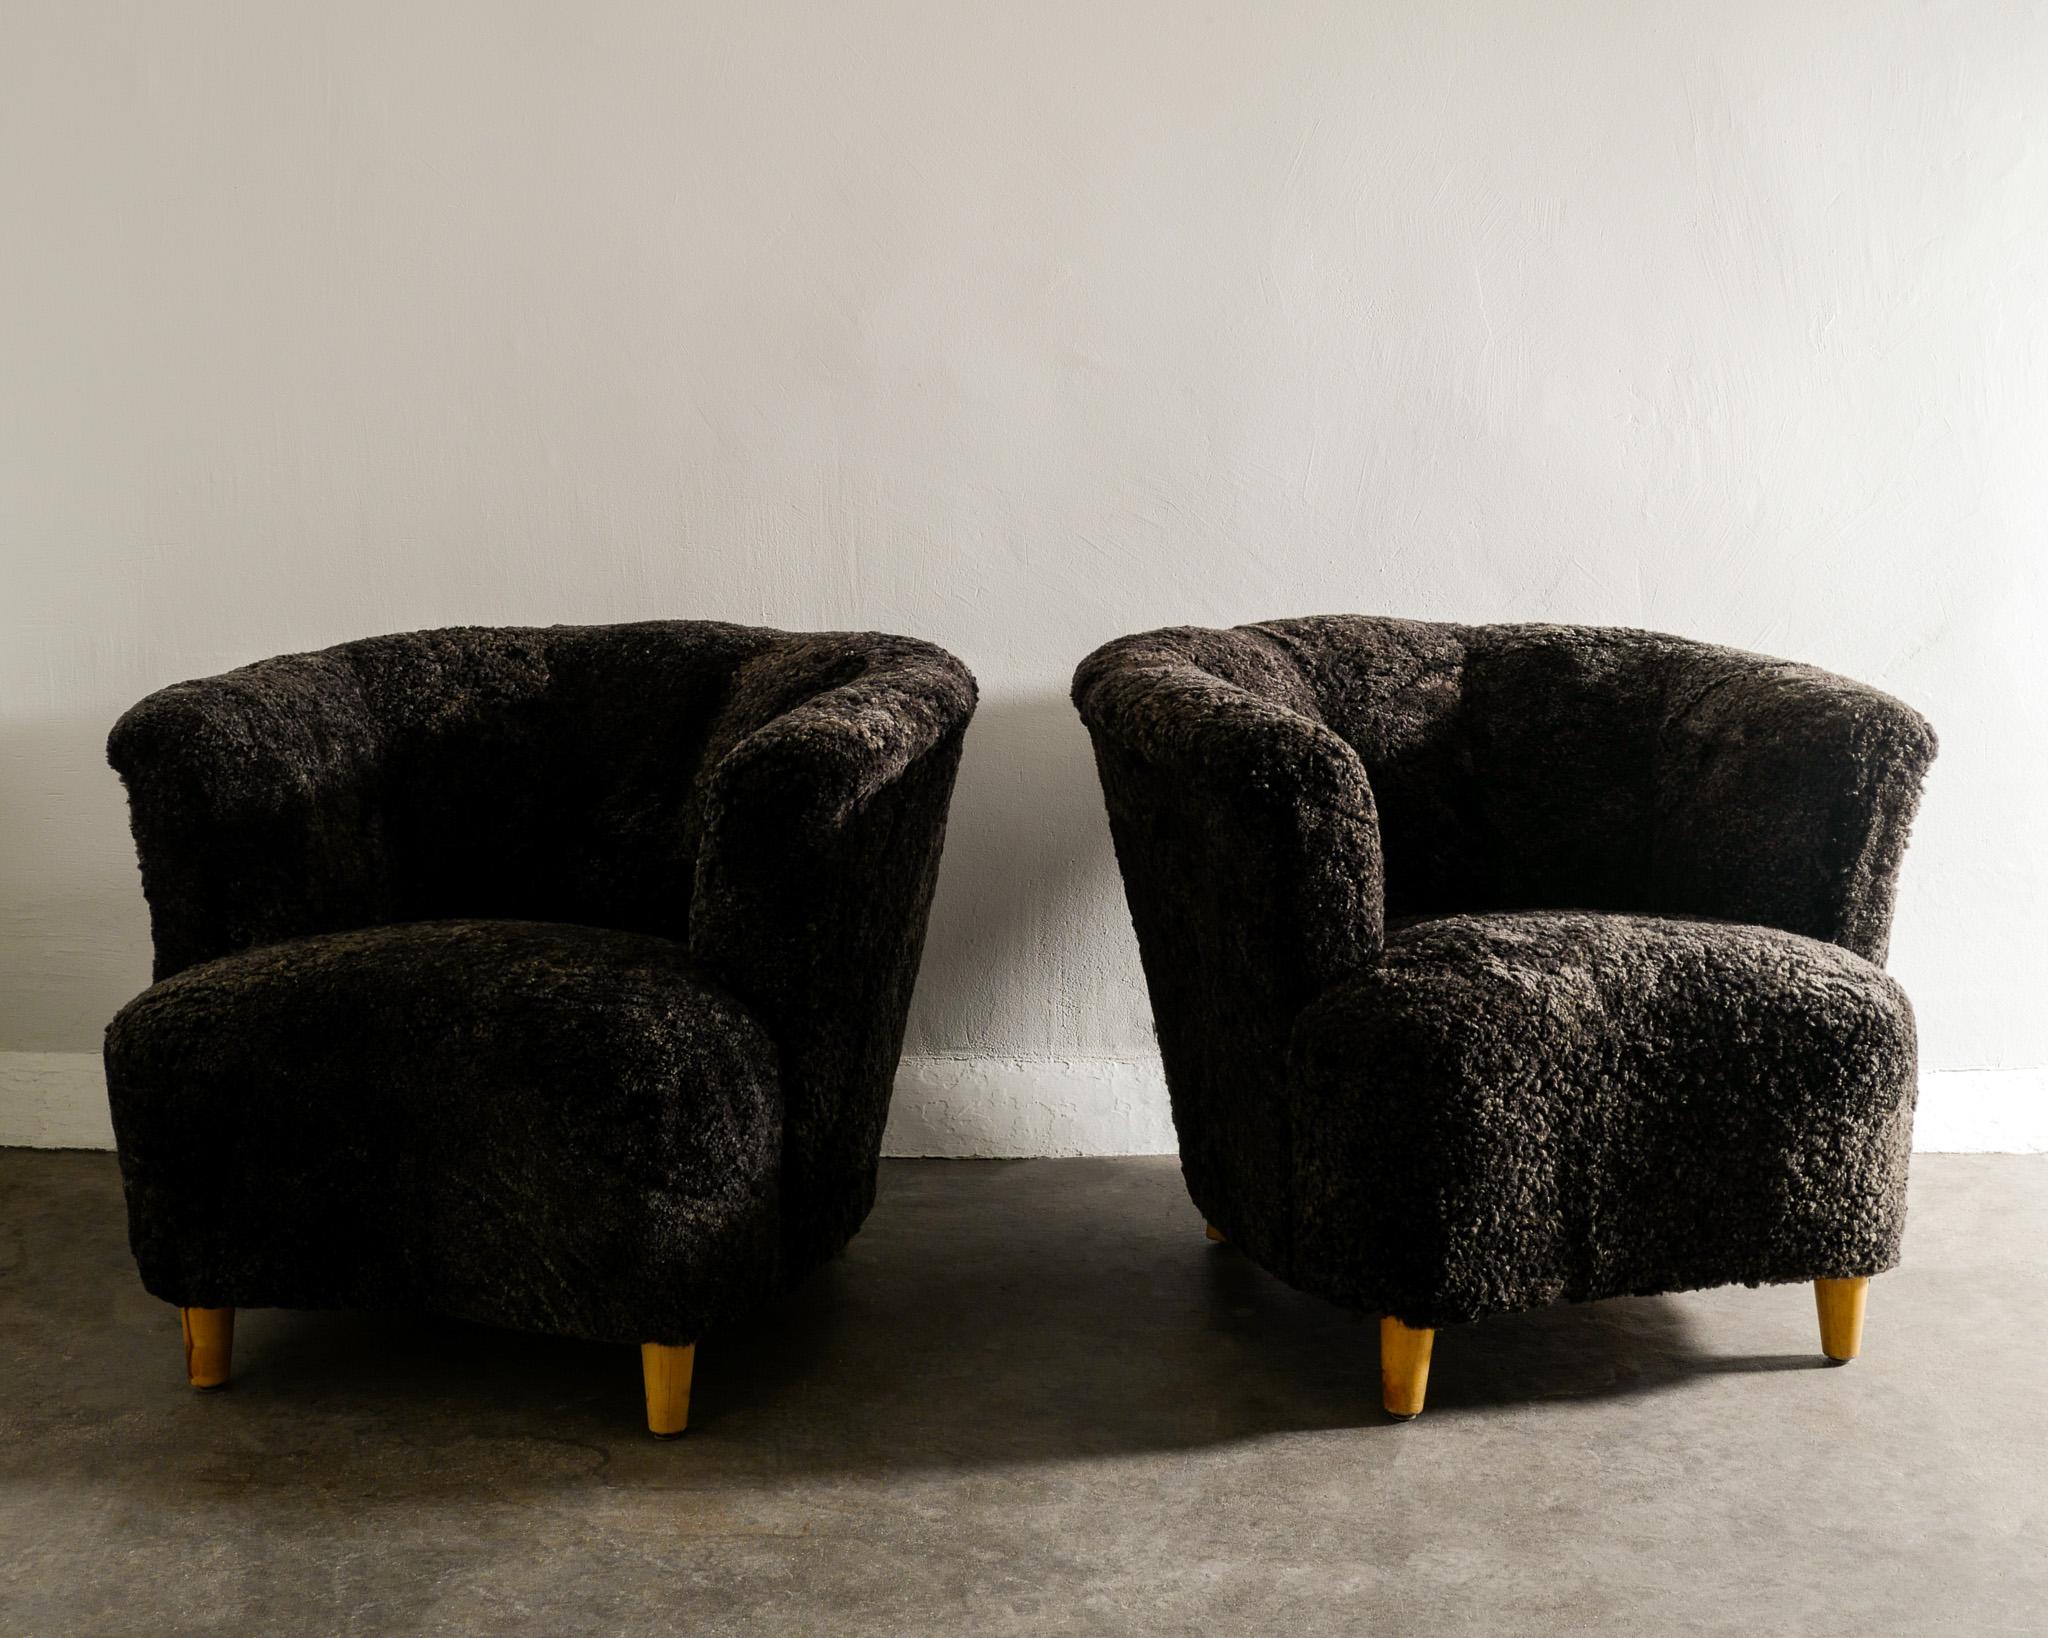 Rare pair of Swedish mid century modern armchairs with a nice curved back.  Fully and professionally restored and newly upholstered in a dark grey sheepskin. 

Dimensions: H: 68 cm W: 84 cm D: 90 cm SH: 44 cm .